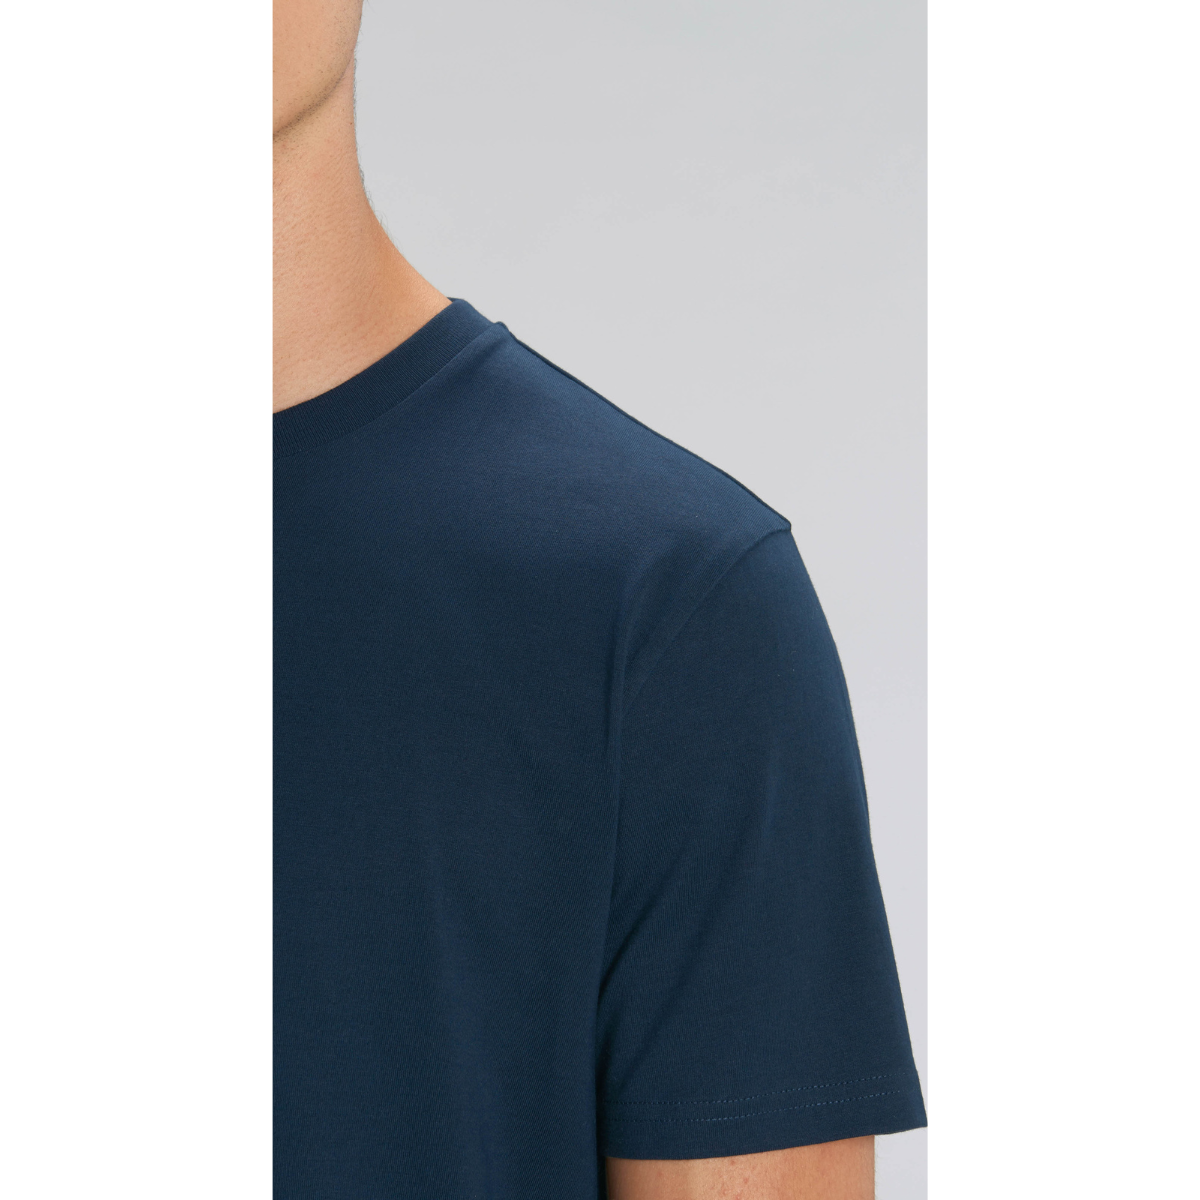 Tee-shirt éco-responsable homme Toulouse